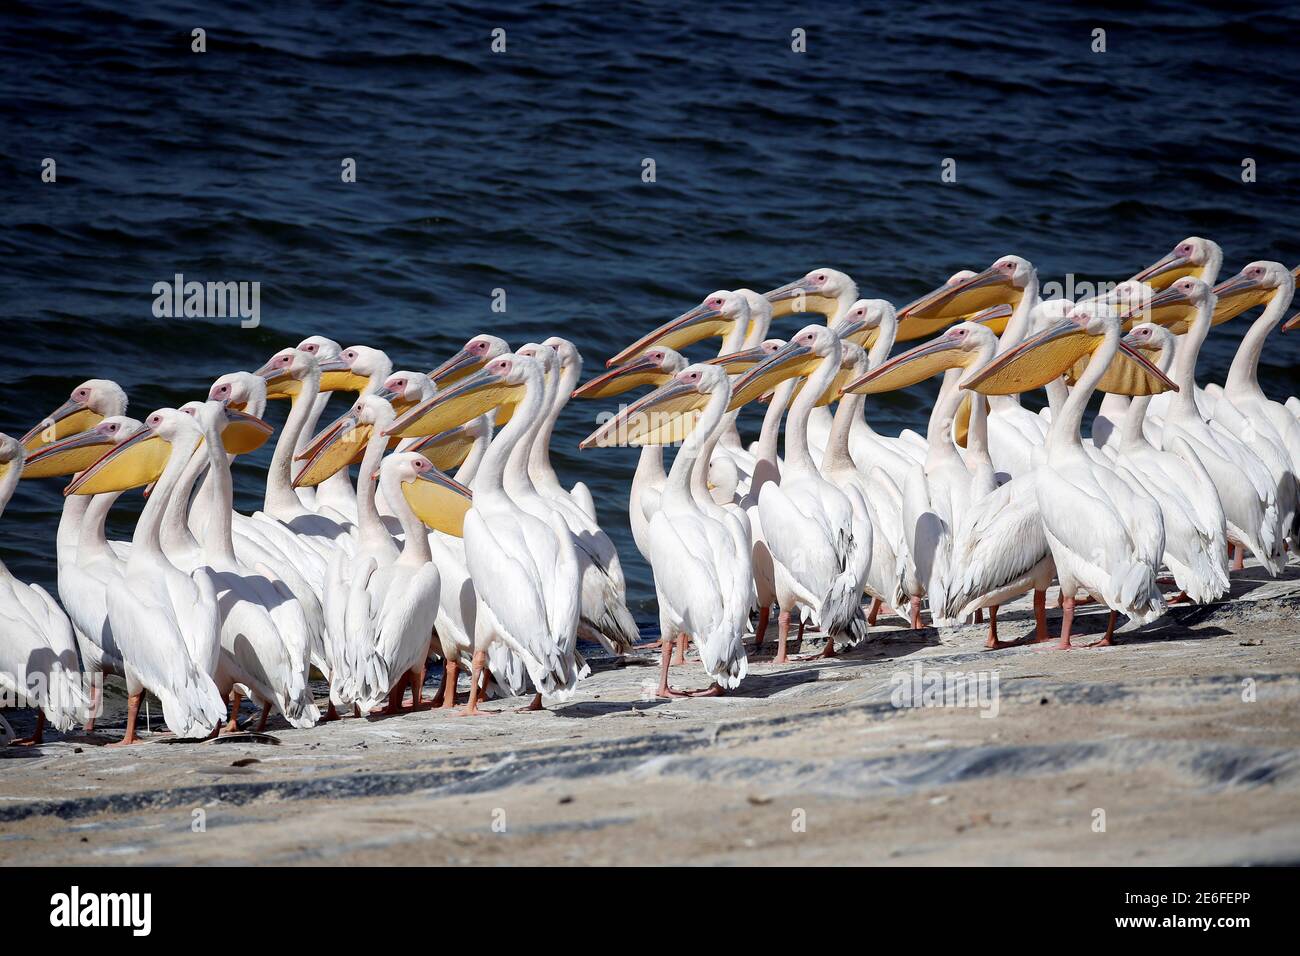 Great white pelicans stand in the water as they are fed by employees from the Israel's nature and parks authority, during their migrating season, in Mishmar Hasharon, central Israel October 13, 2016. REUTERS/Baz Ratner Stock Photo